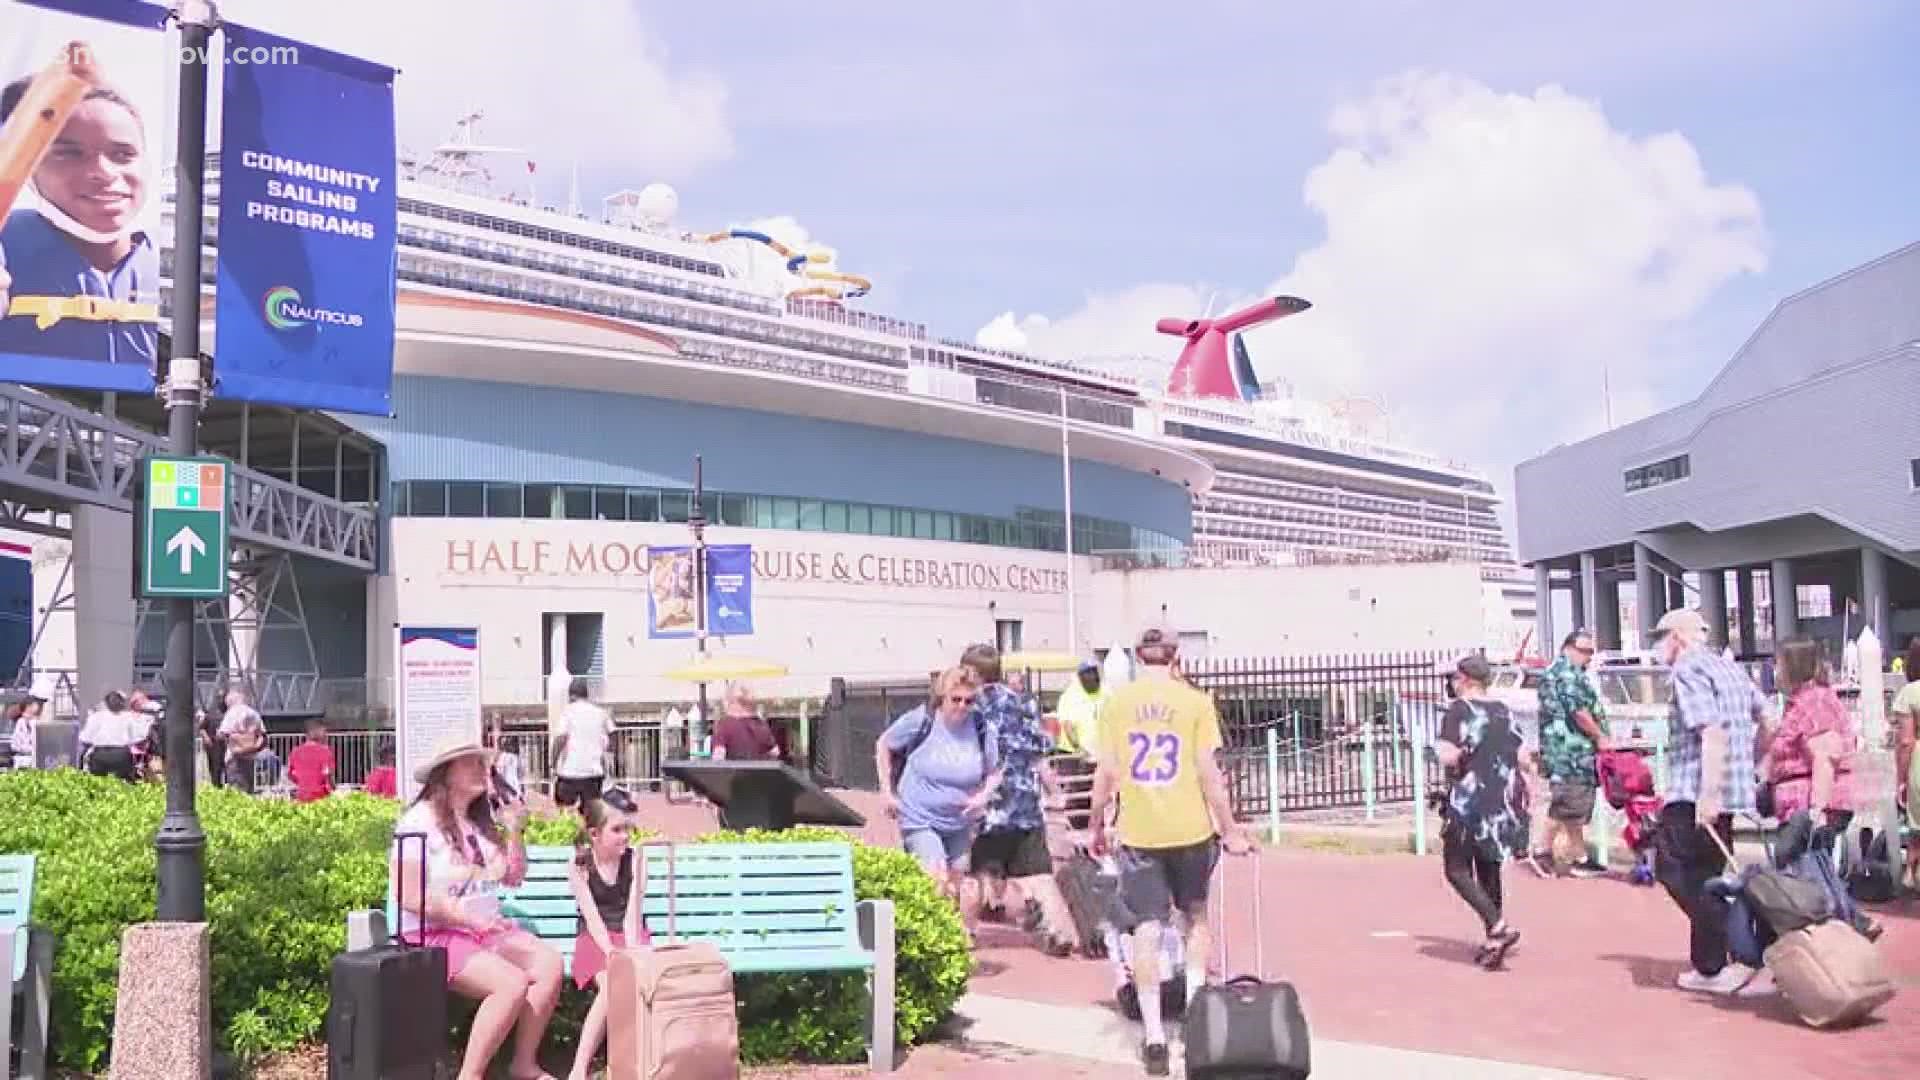 According to the Coast Guard, passengers reported nausea and vomiting from a chemical smell and fumes on the cruise ship.